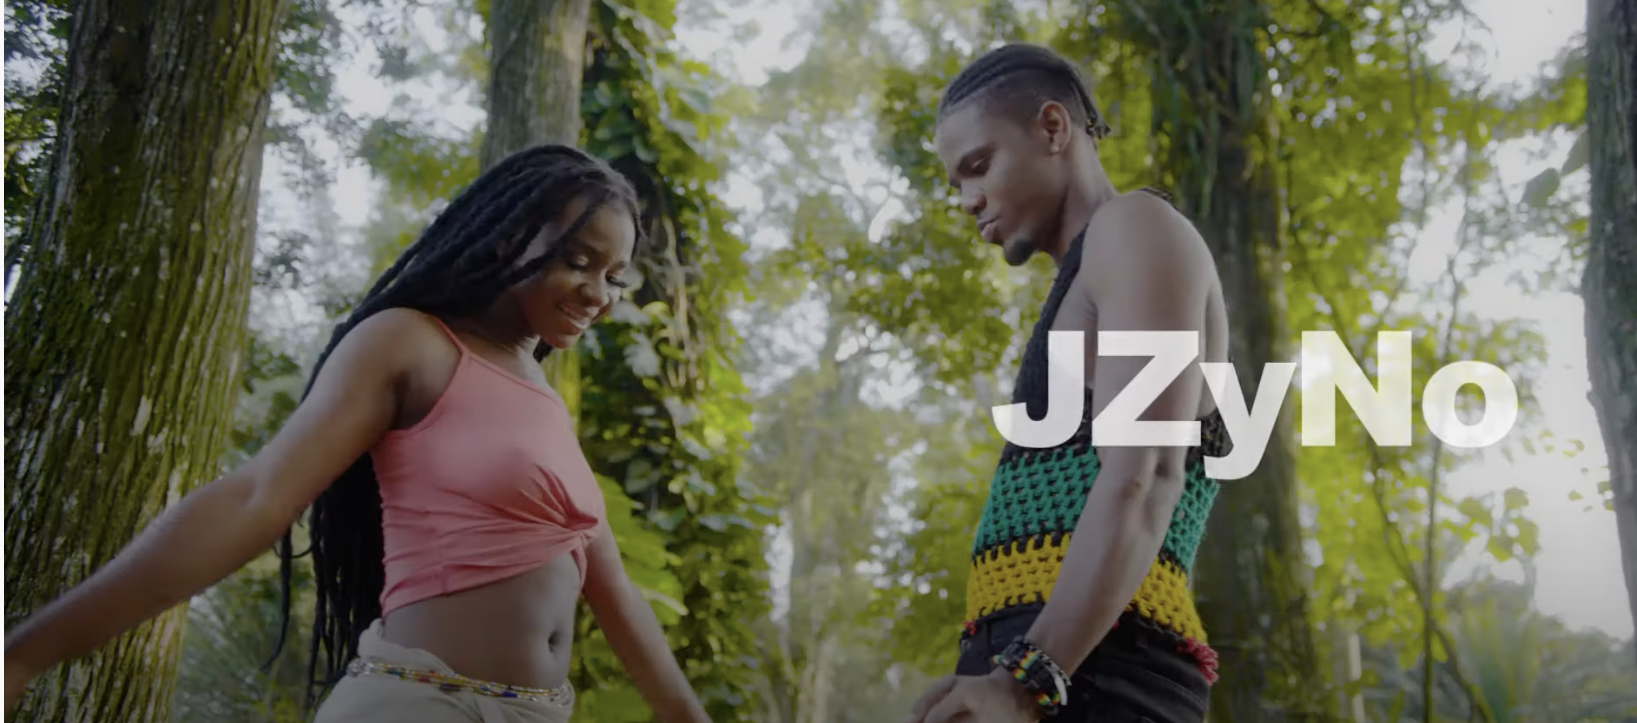 Liberian star JZyNO serves ALL YOU WANT visuals as he tours Lagos, Nigeria.